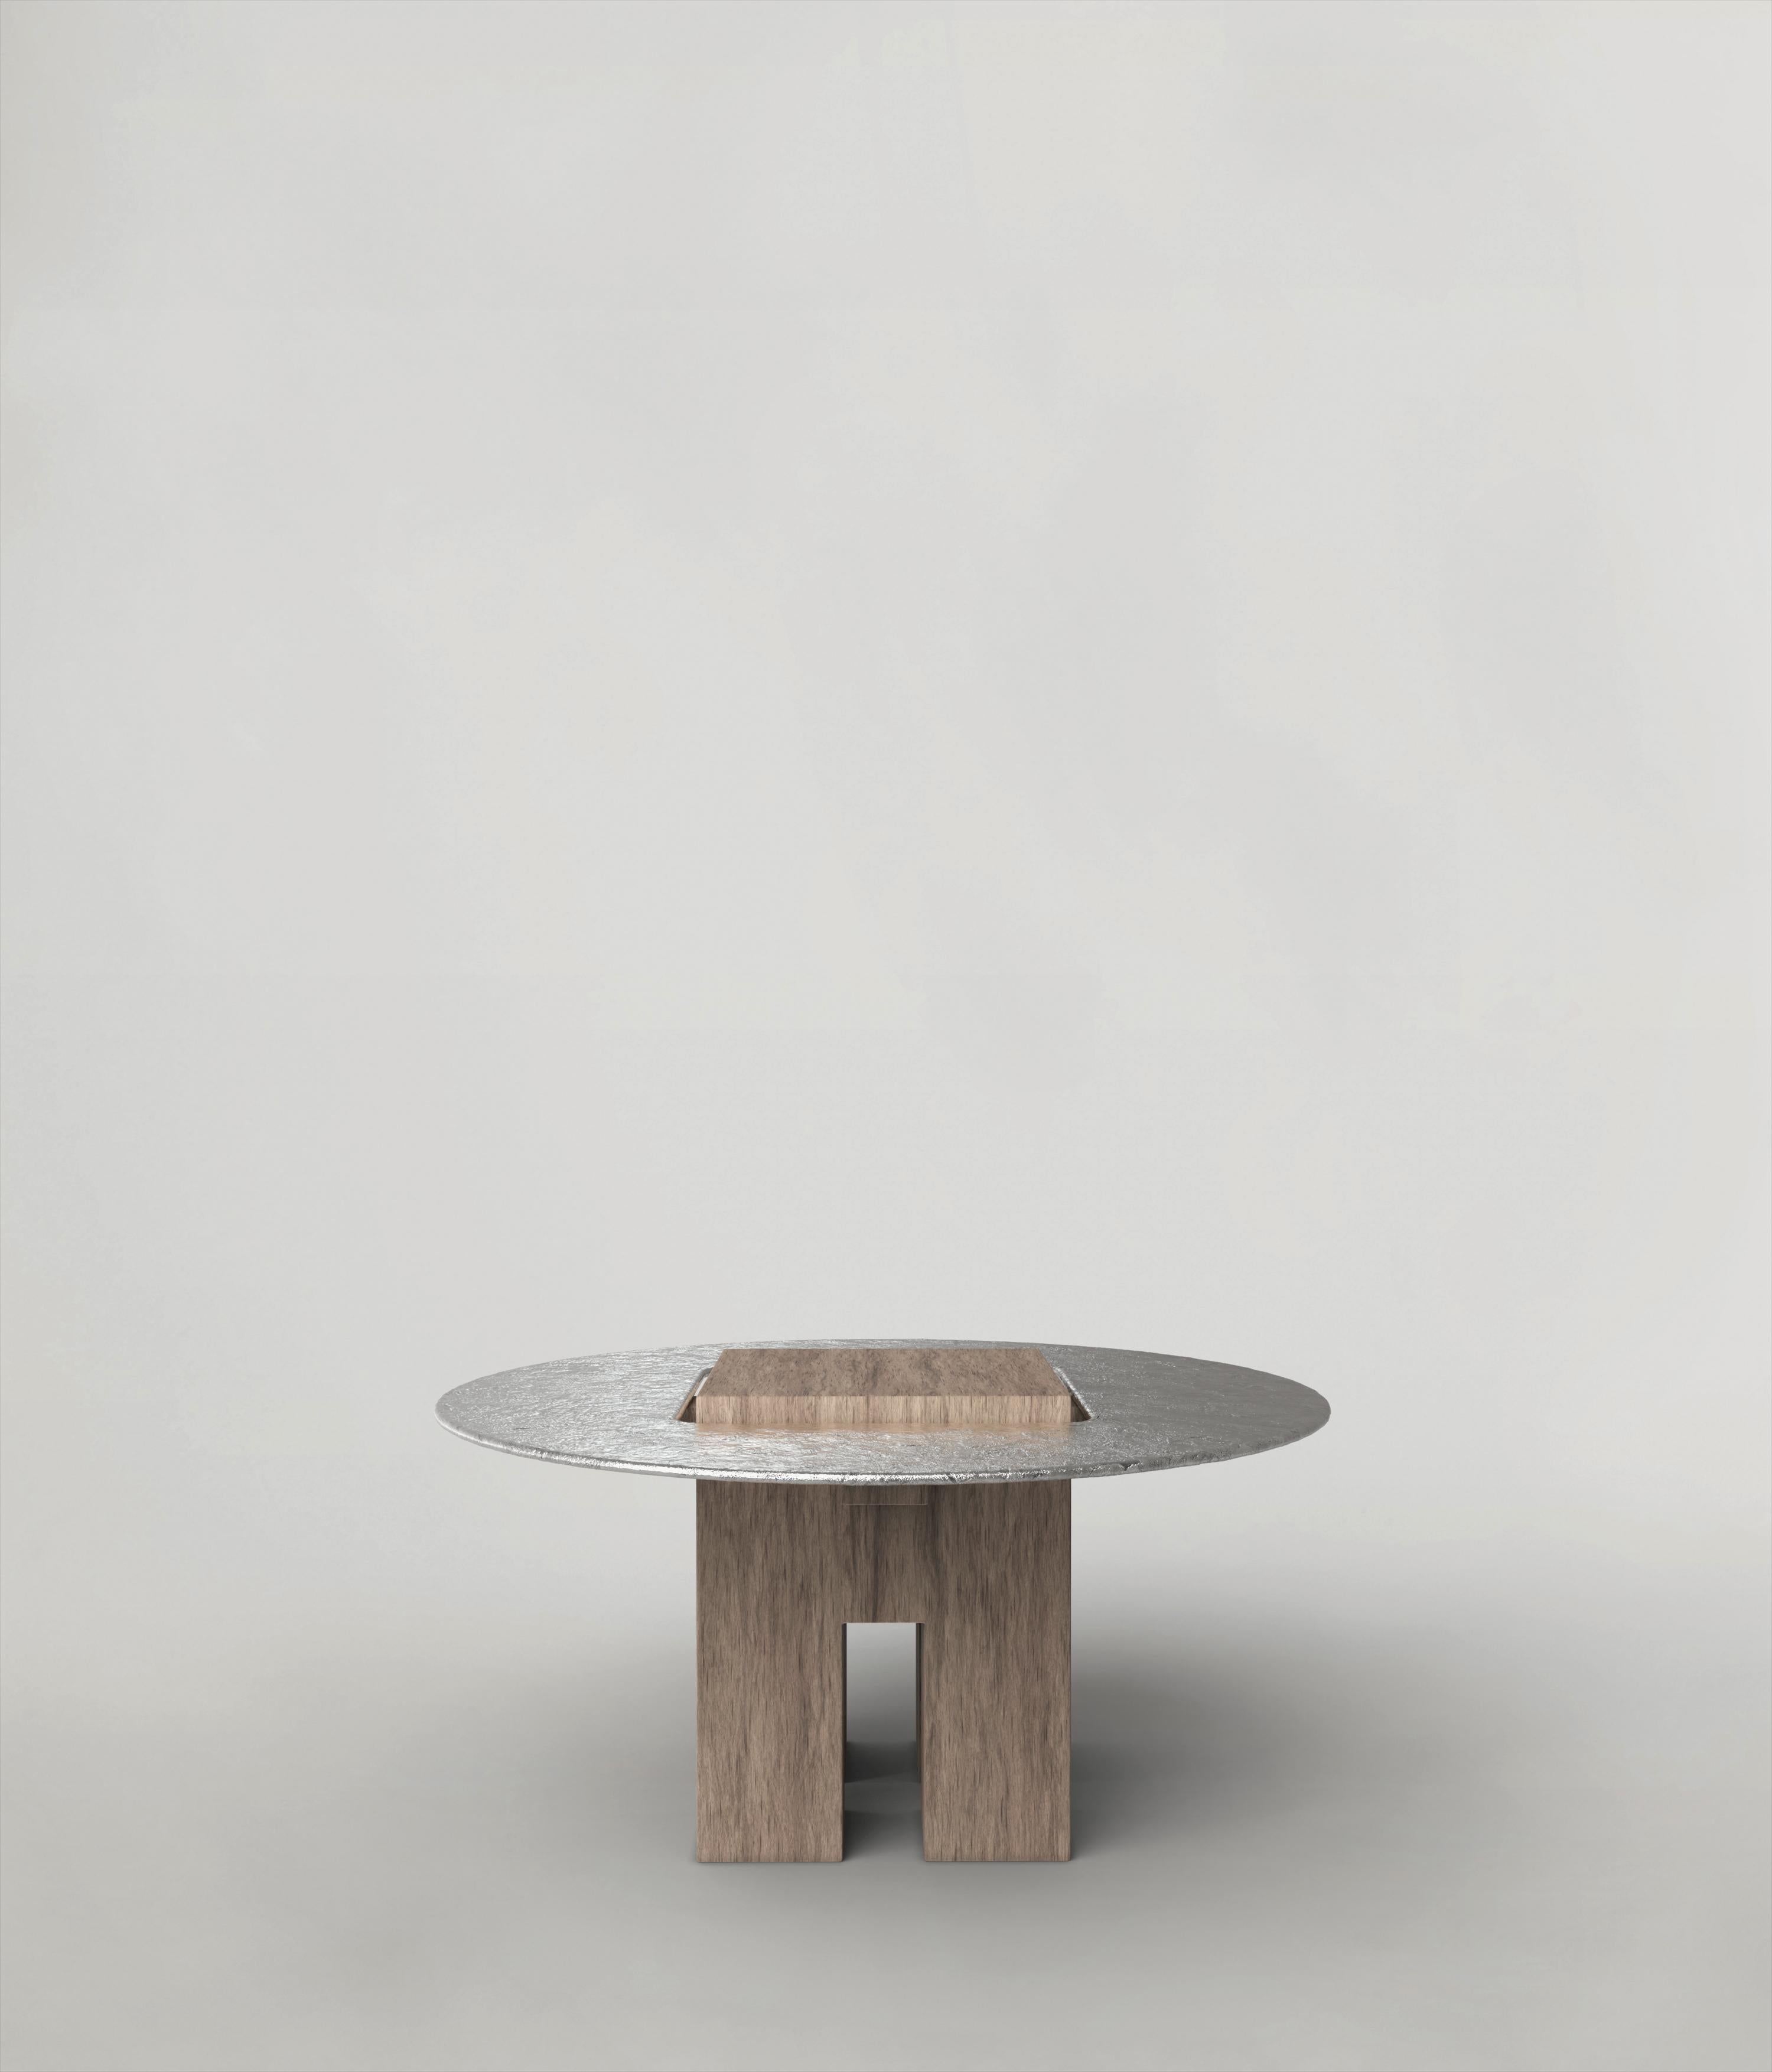 Tempio V1 Low Table by Edizione Limitata
Limited Edition of 150 pieces. Signed and numbered.
Dimensions: D82 x W82 x H40 cm
Materials: Solid Ash Wood+Aluminum

Tempio is a collection of contemporary sculptural table made by Italian artisans in